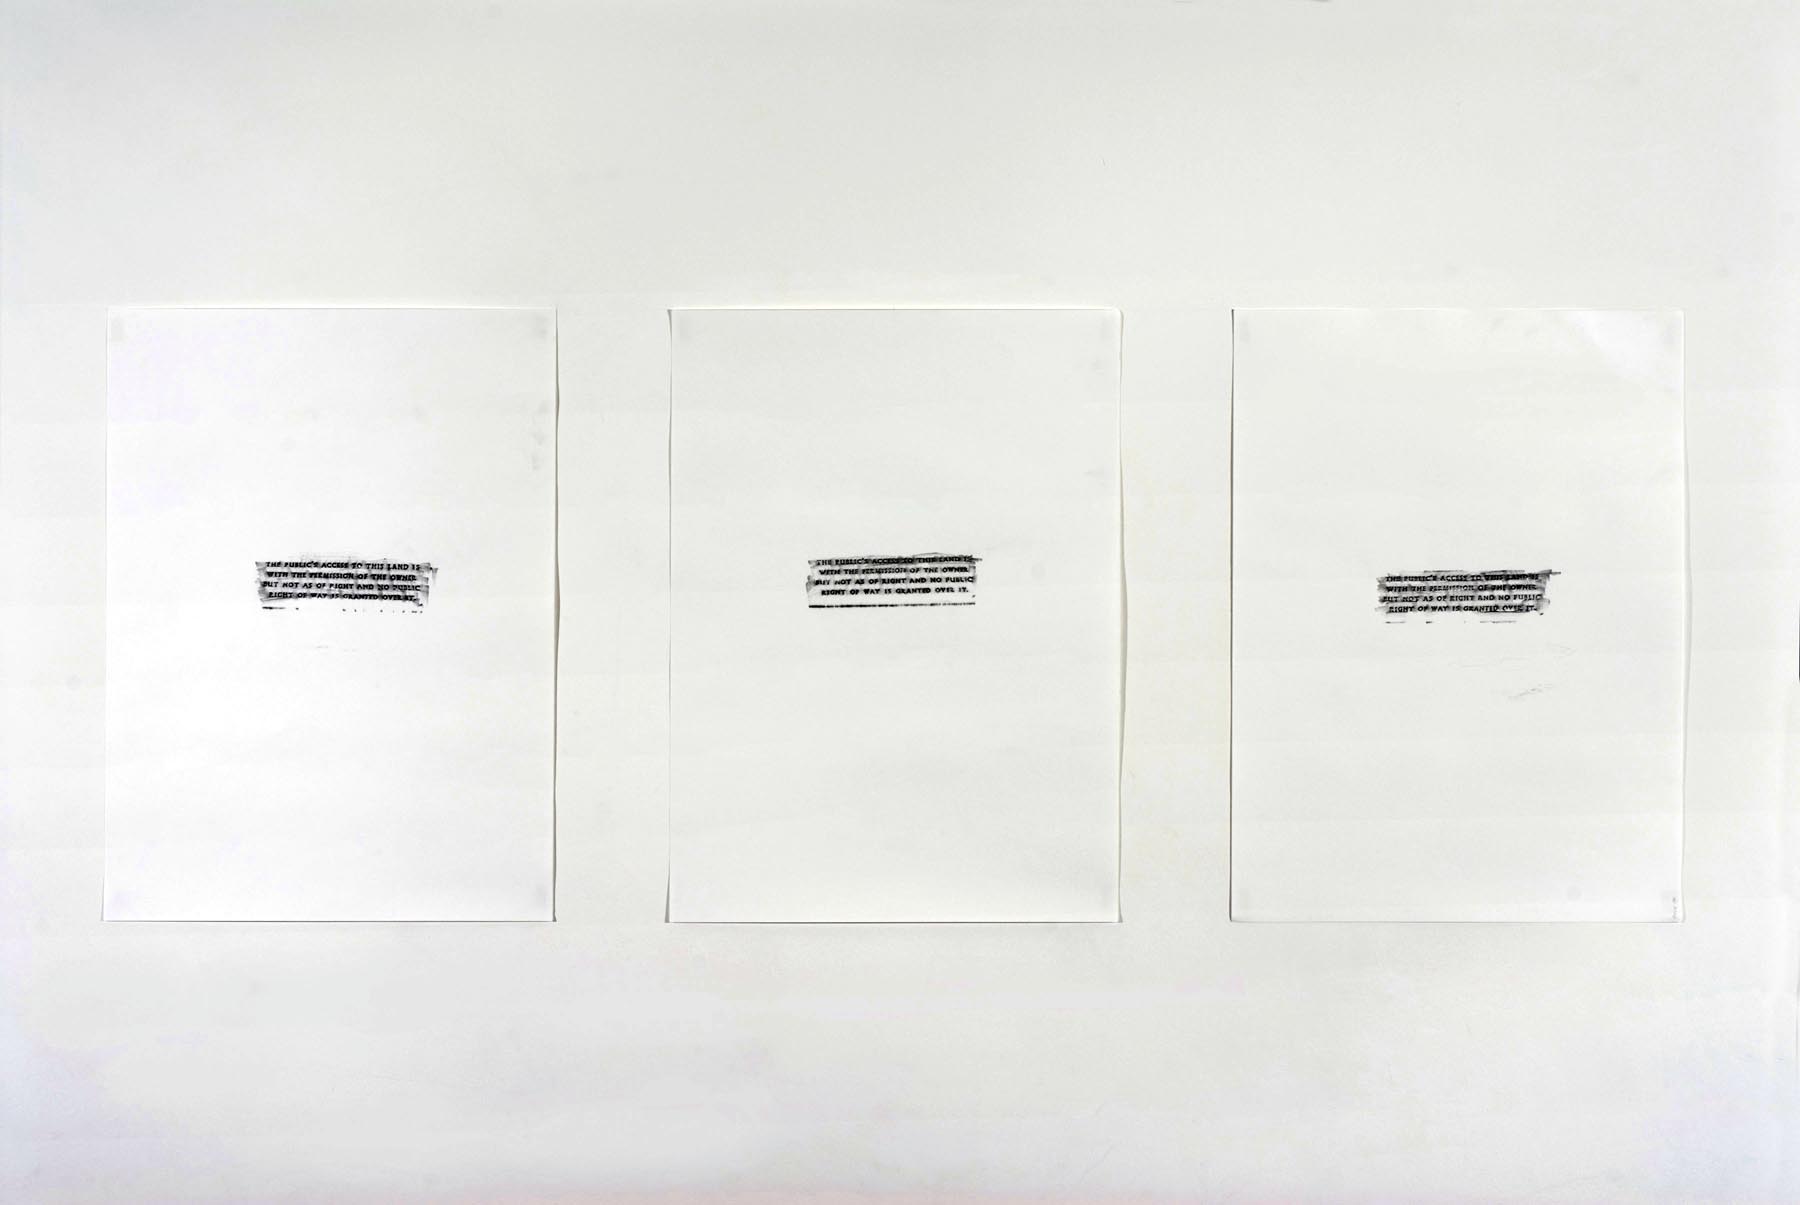      Untitled (From Engineering Consent)   2007   Pencil on Paper   3 parts:&nbsp;  each: 76.2 x 56 cm  